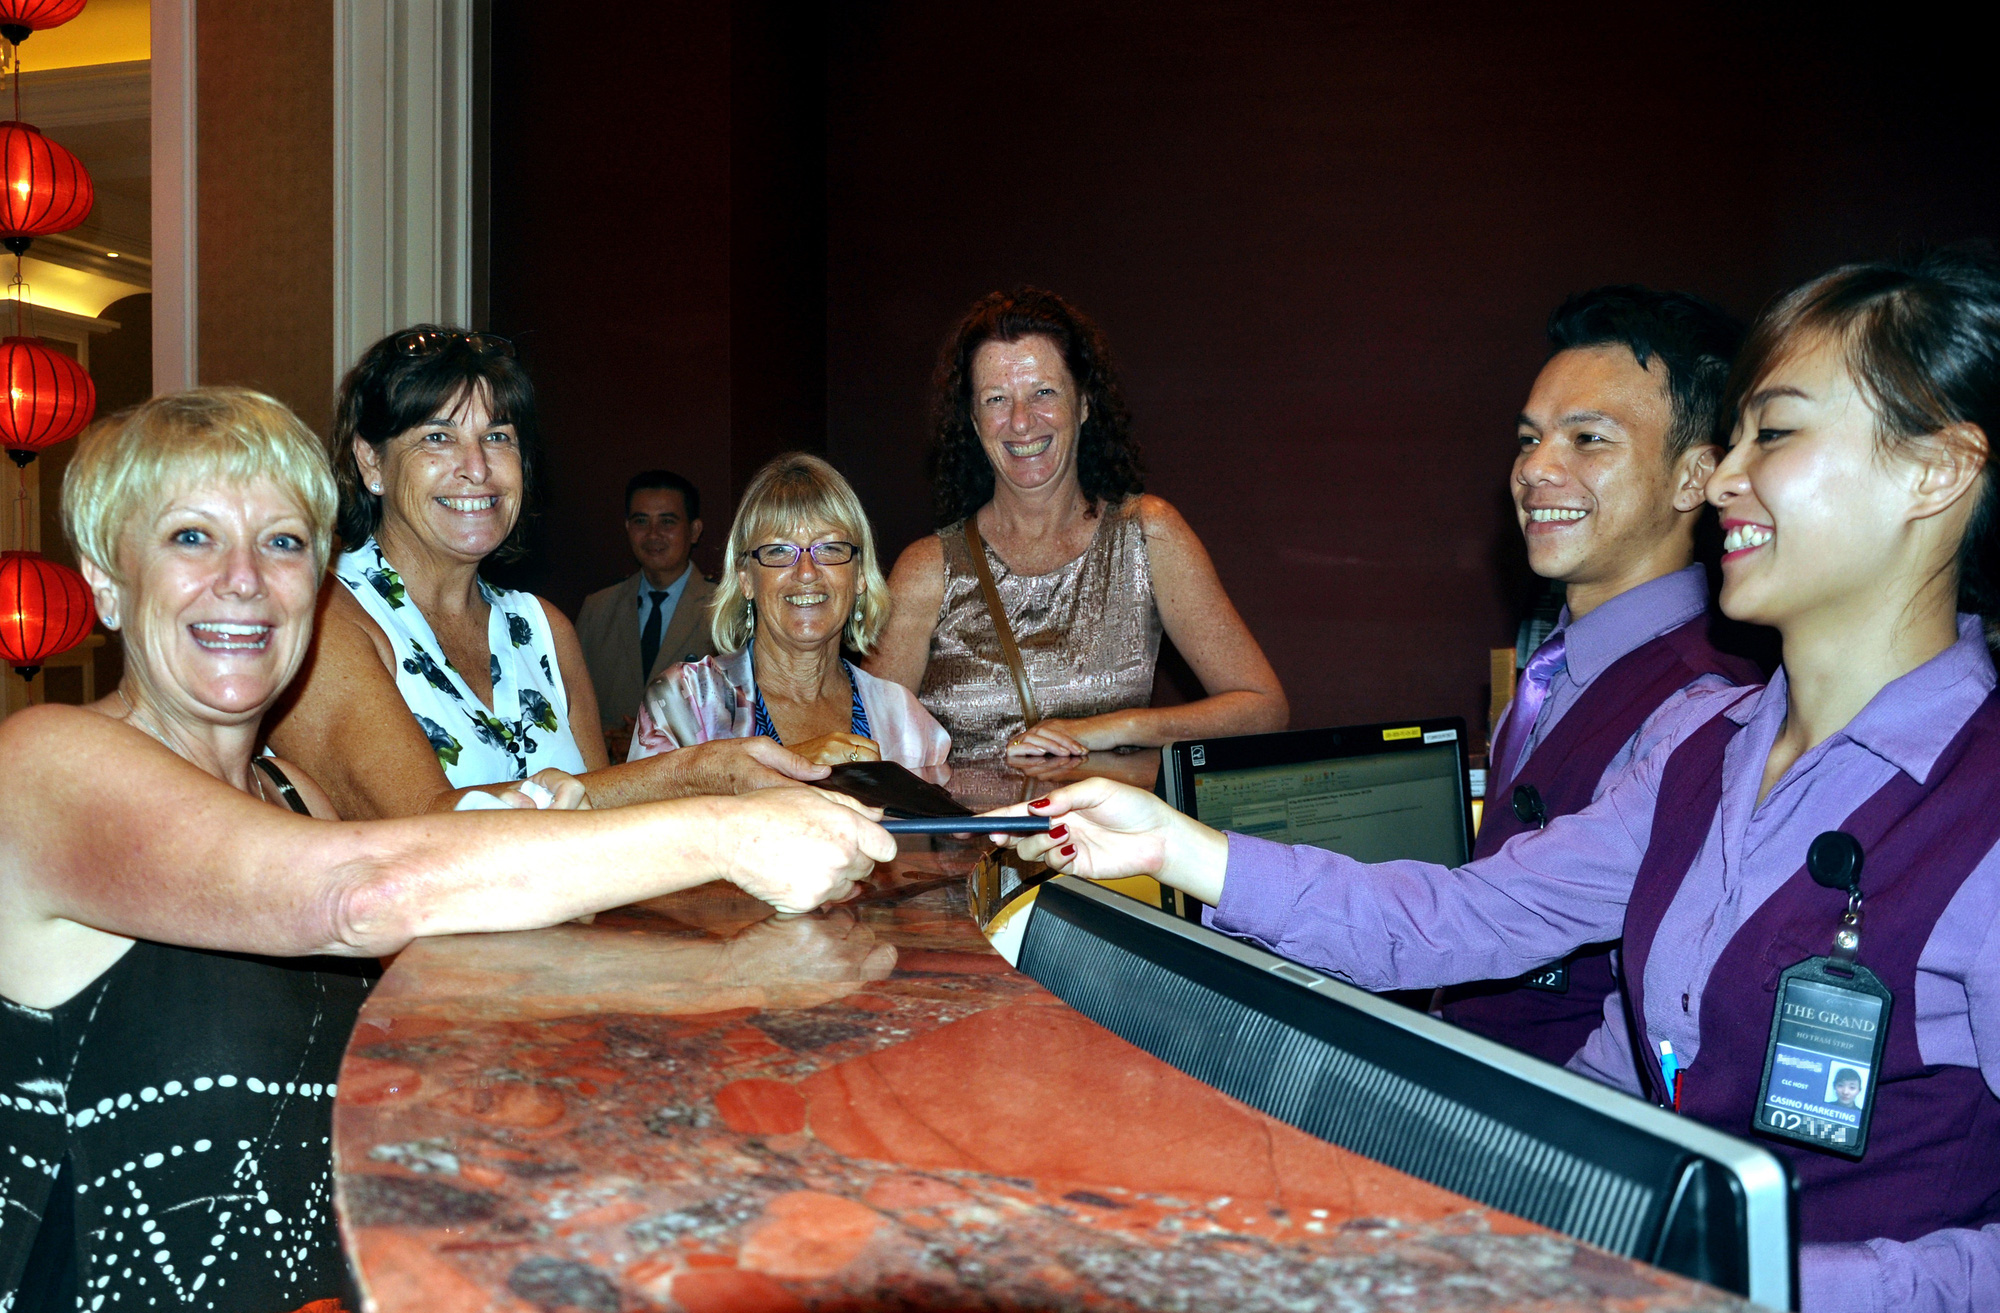 Foreign visitors check in at the Ho Tram Casino in Ba Ria-Vung Tau Province, Vietnam. Photo: Dong Ha / Tuoi Tre